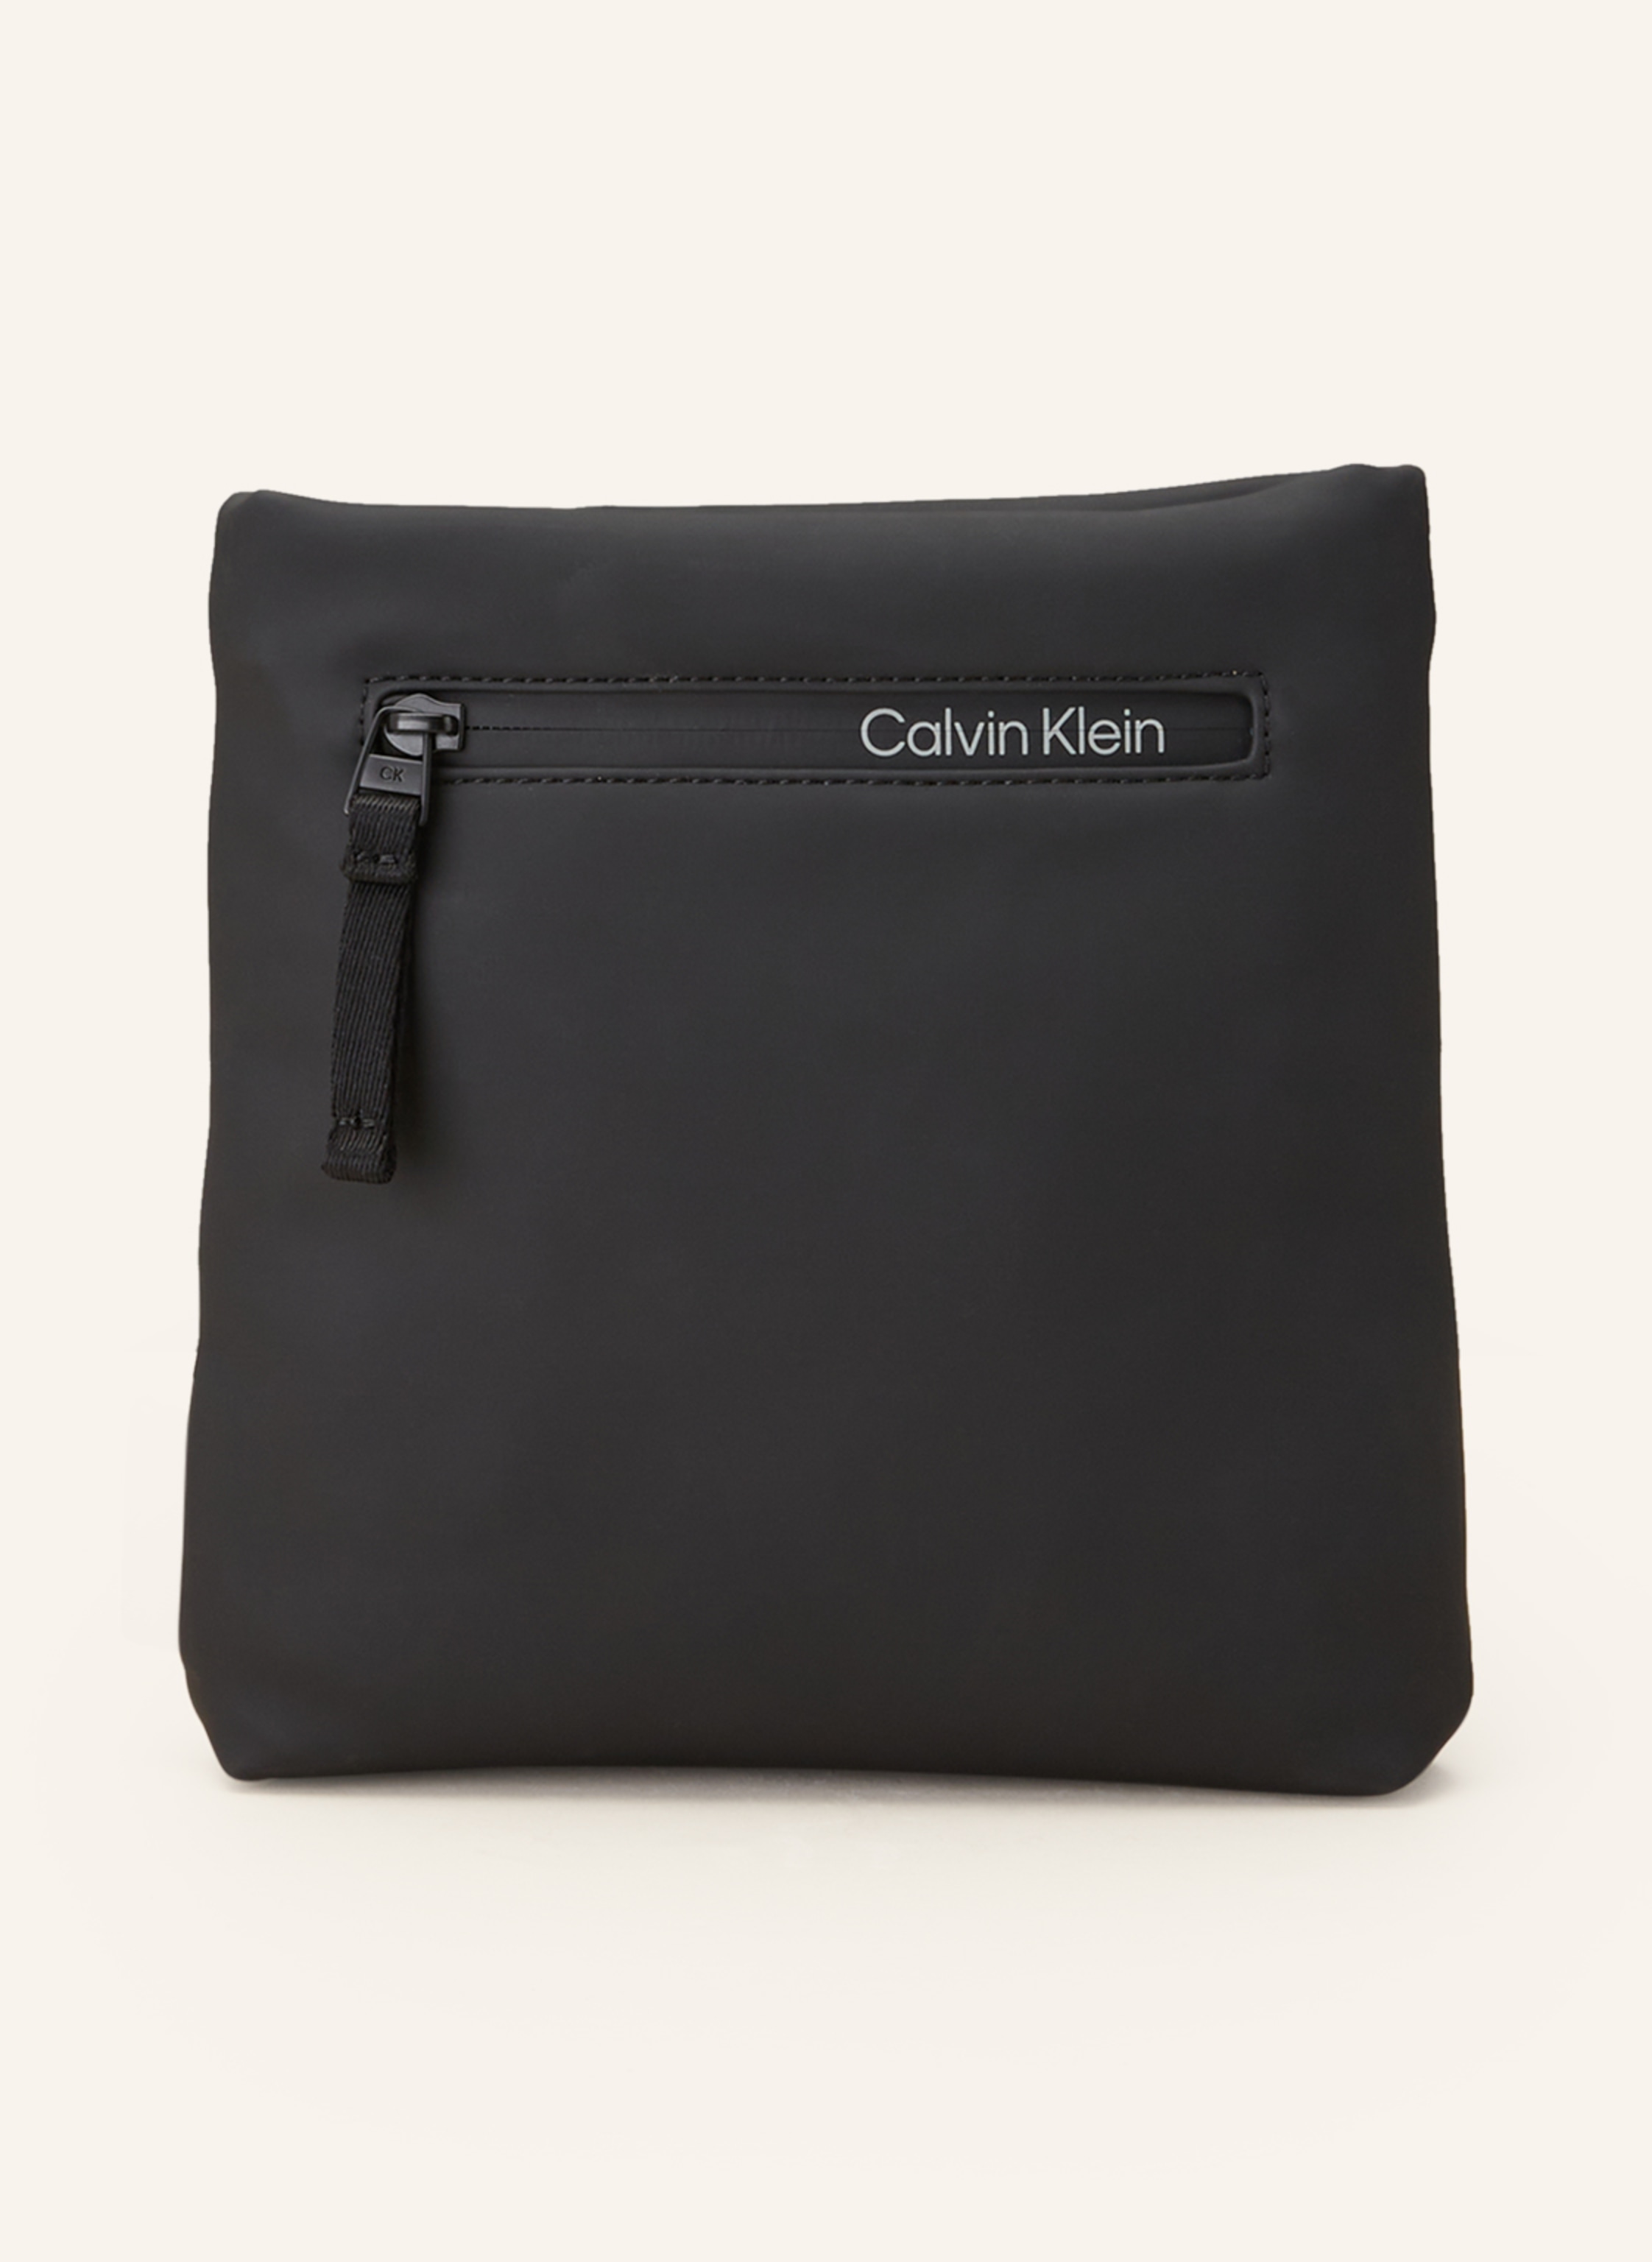 Calvin Klein clutch bag, Men's Fashion, Bags, Belt bags, Clutches and  Pouches on Carousell